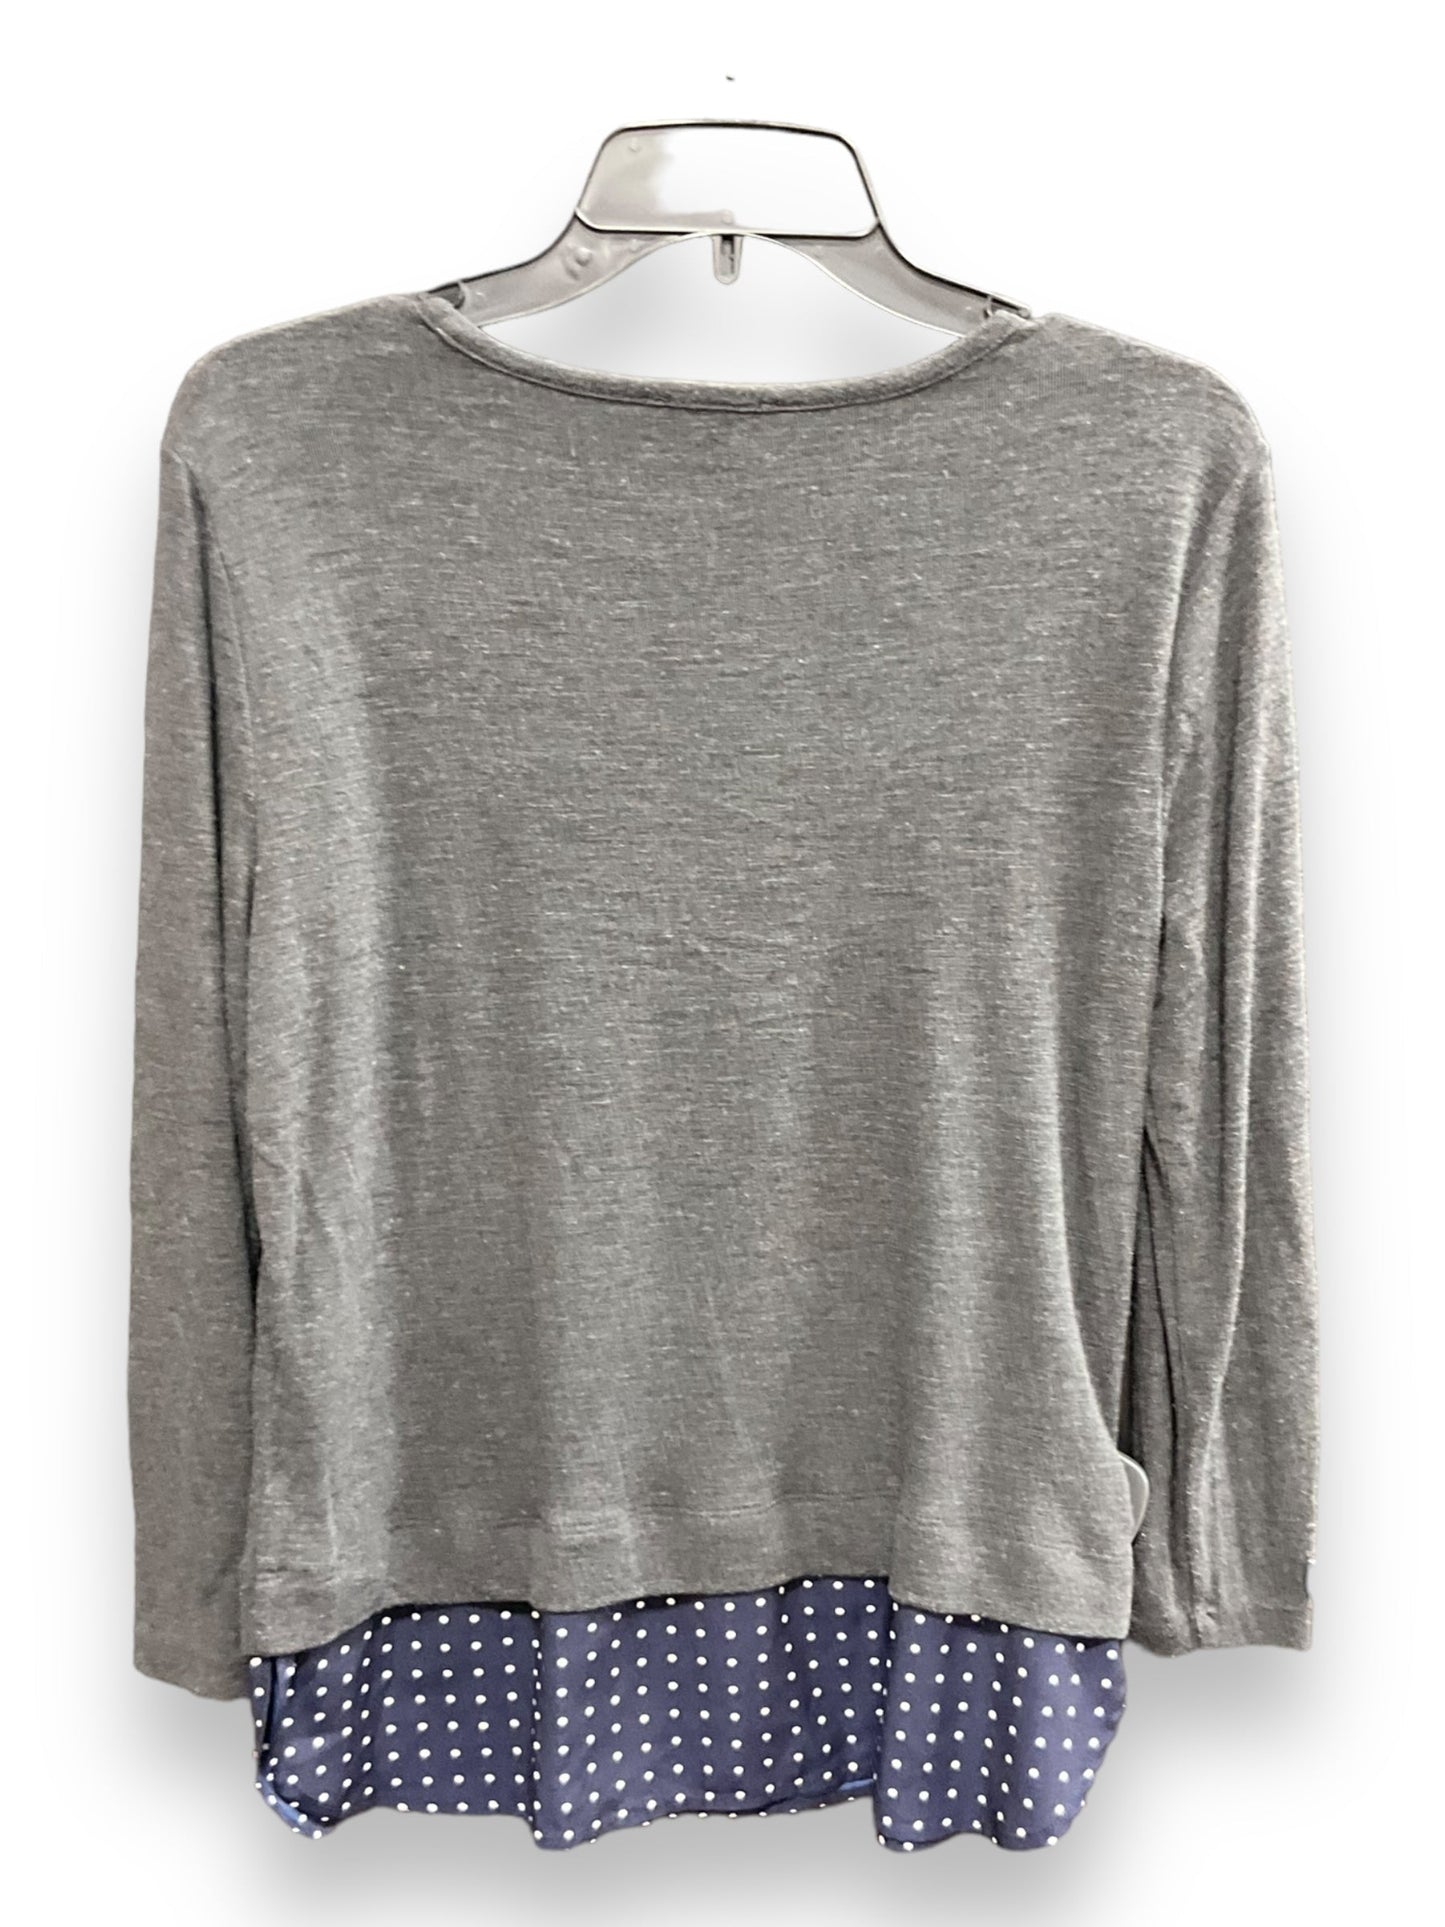 Charcoal Top Long Sleeve J Crew, Size S